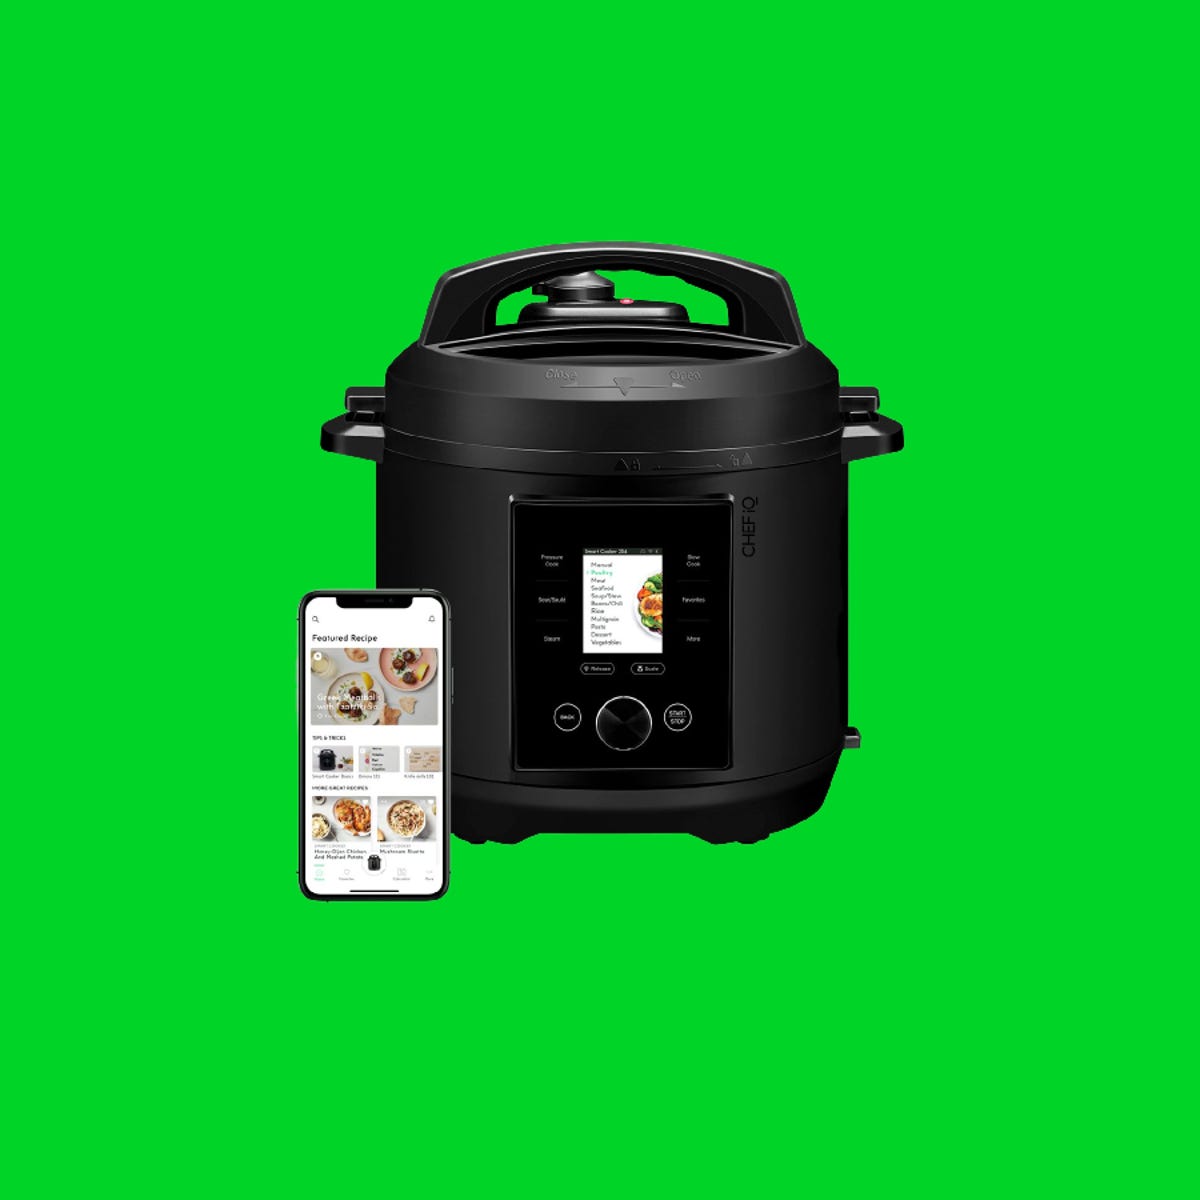 This $100 Smart Pressure Cooker From Chef iQ Is the Perfect Kitchen  Companion - CNET